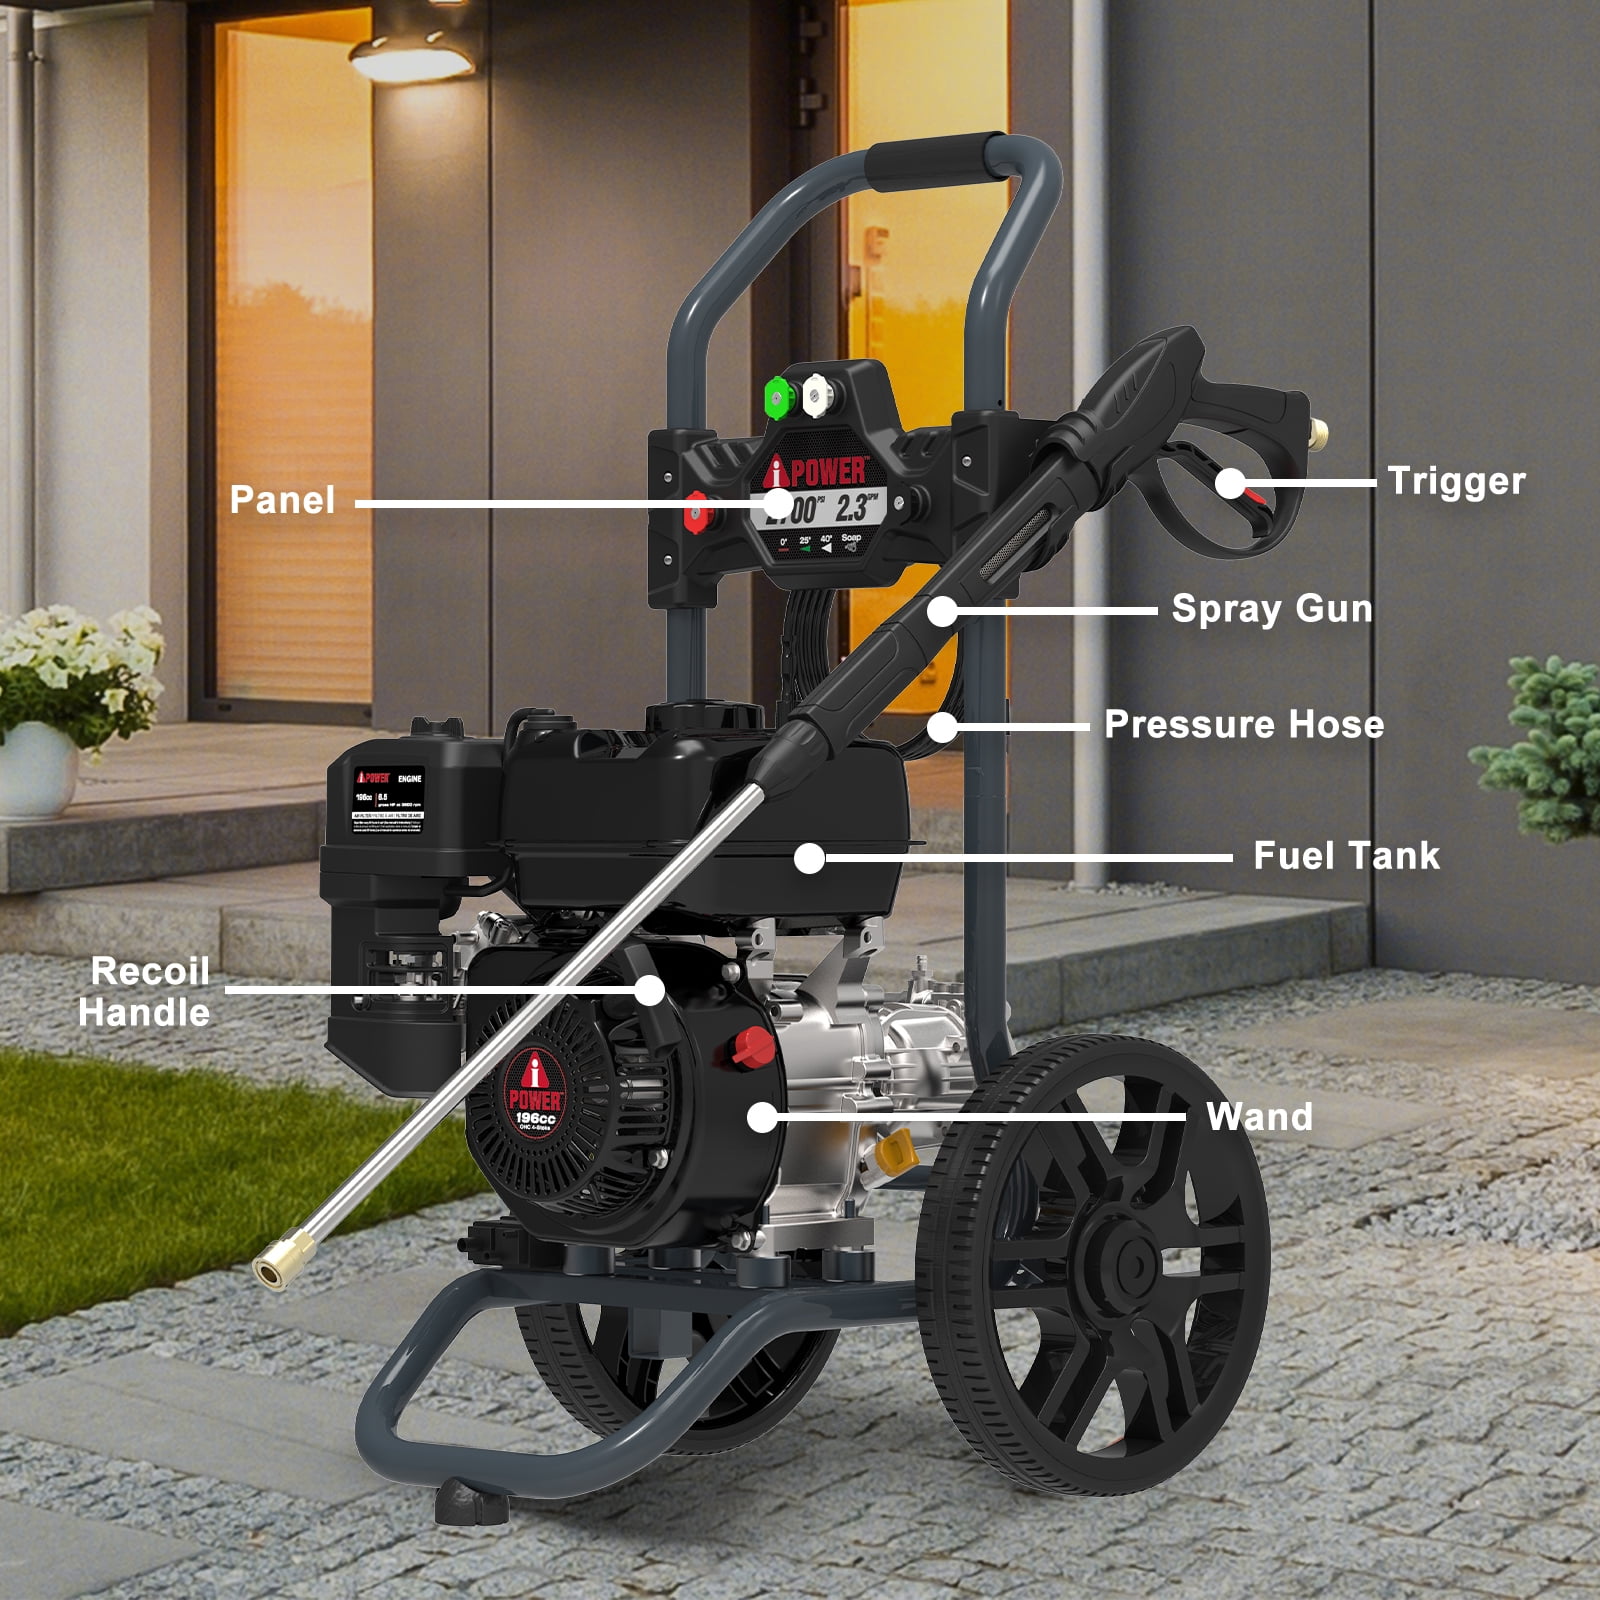 A-iPower 2700 PSI at 2.3 GPM 196cc 4-Cycle OHV Gas Powered Cold Water Pressure Washer - 2